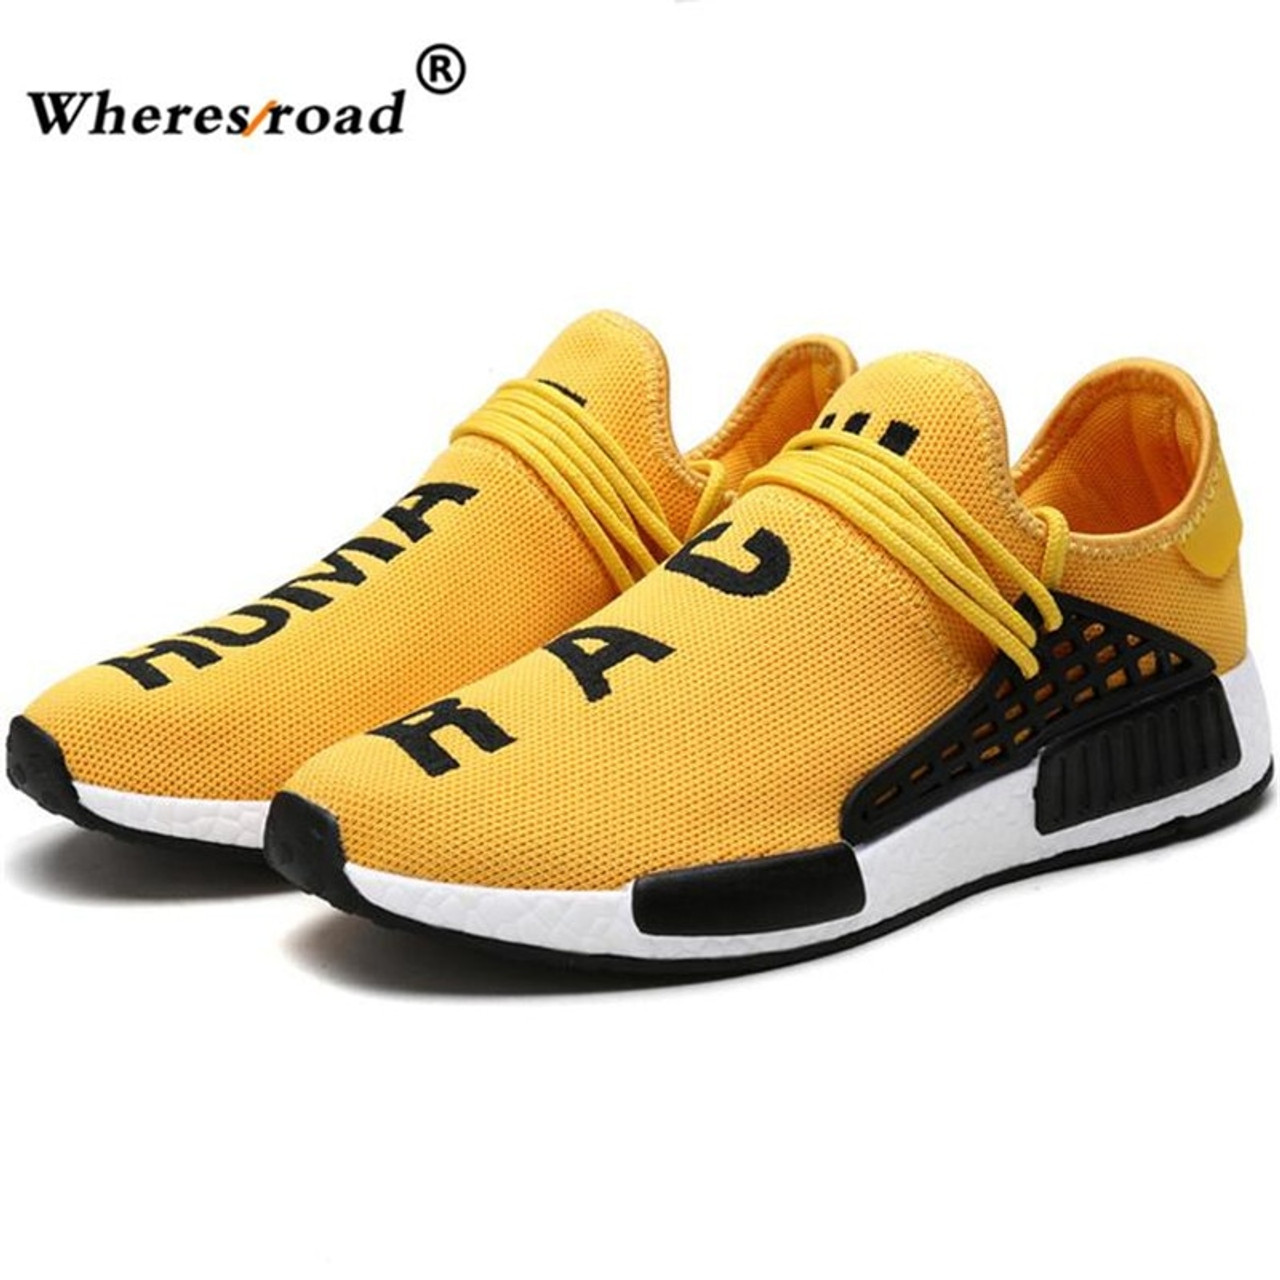 comfortable yellow shoes